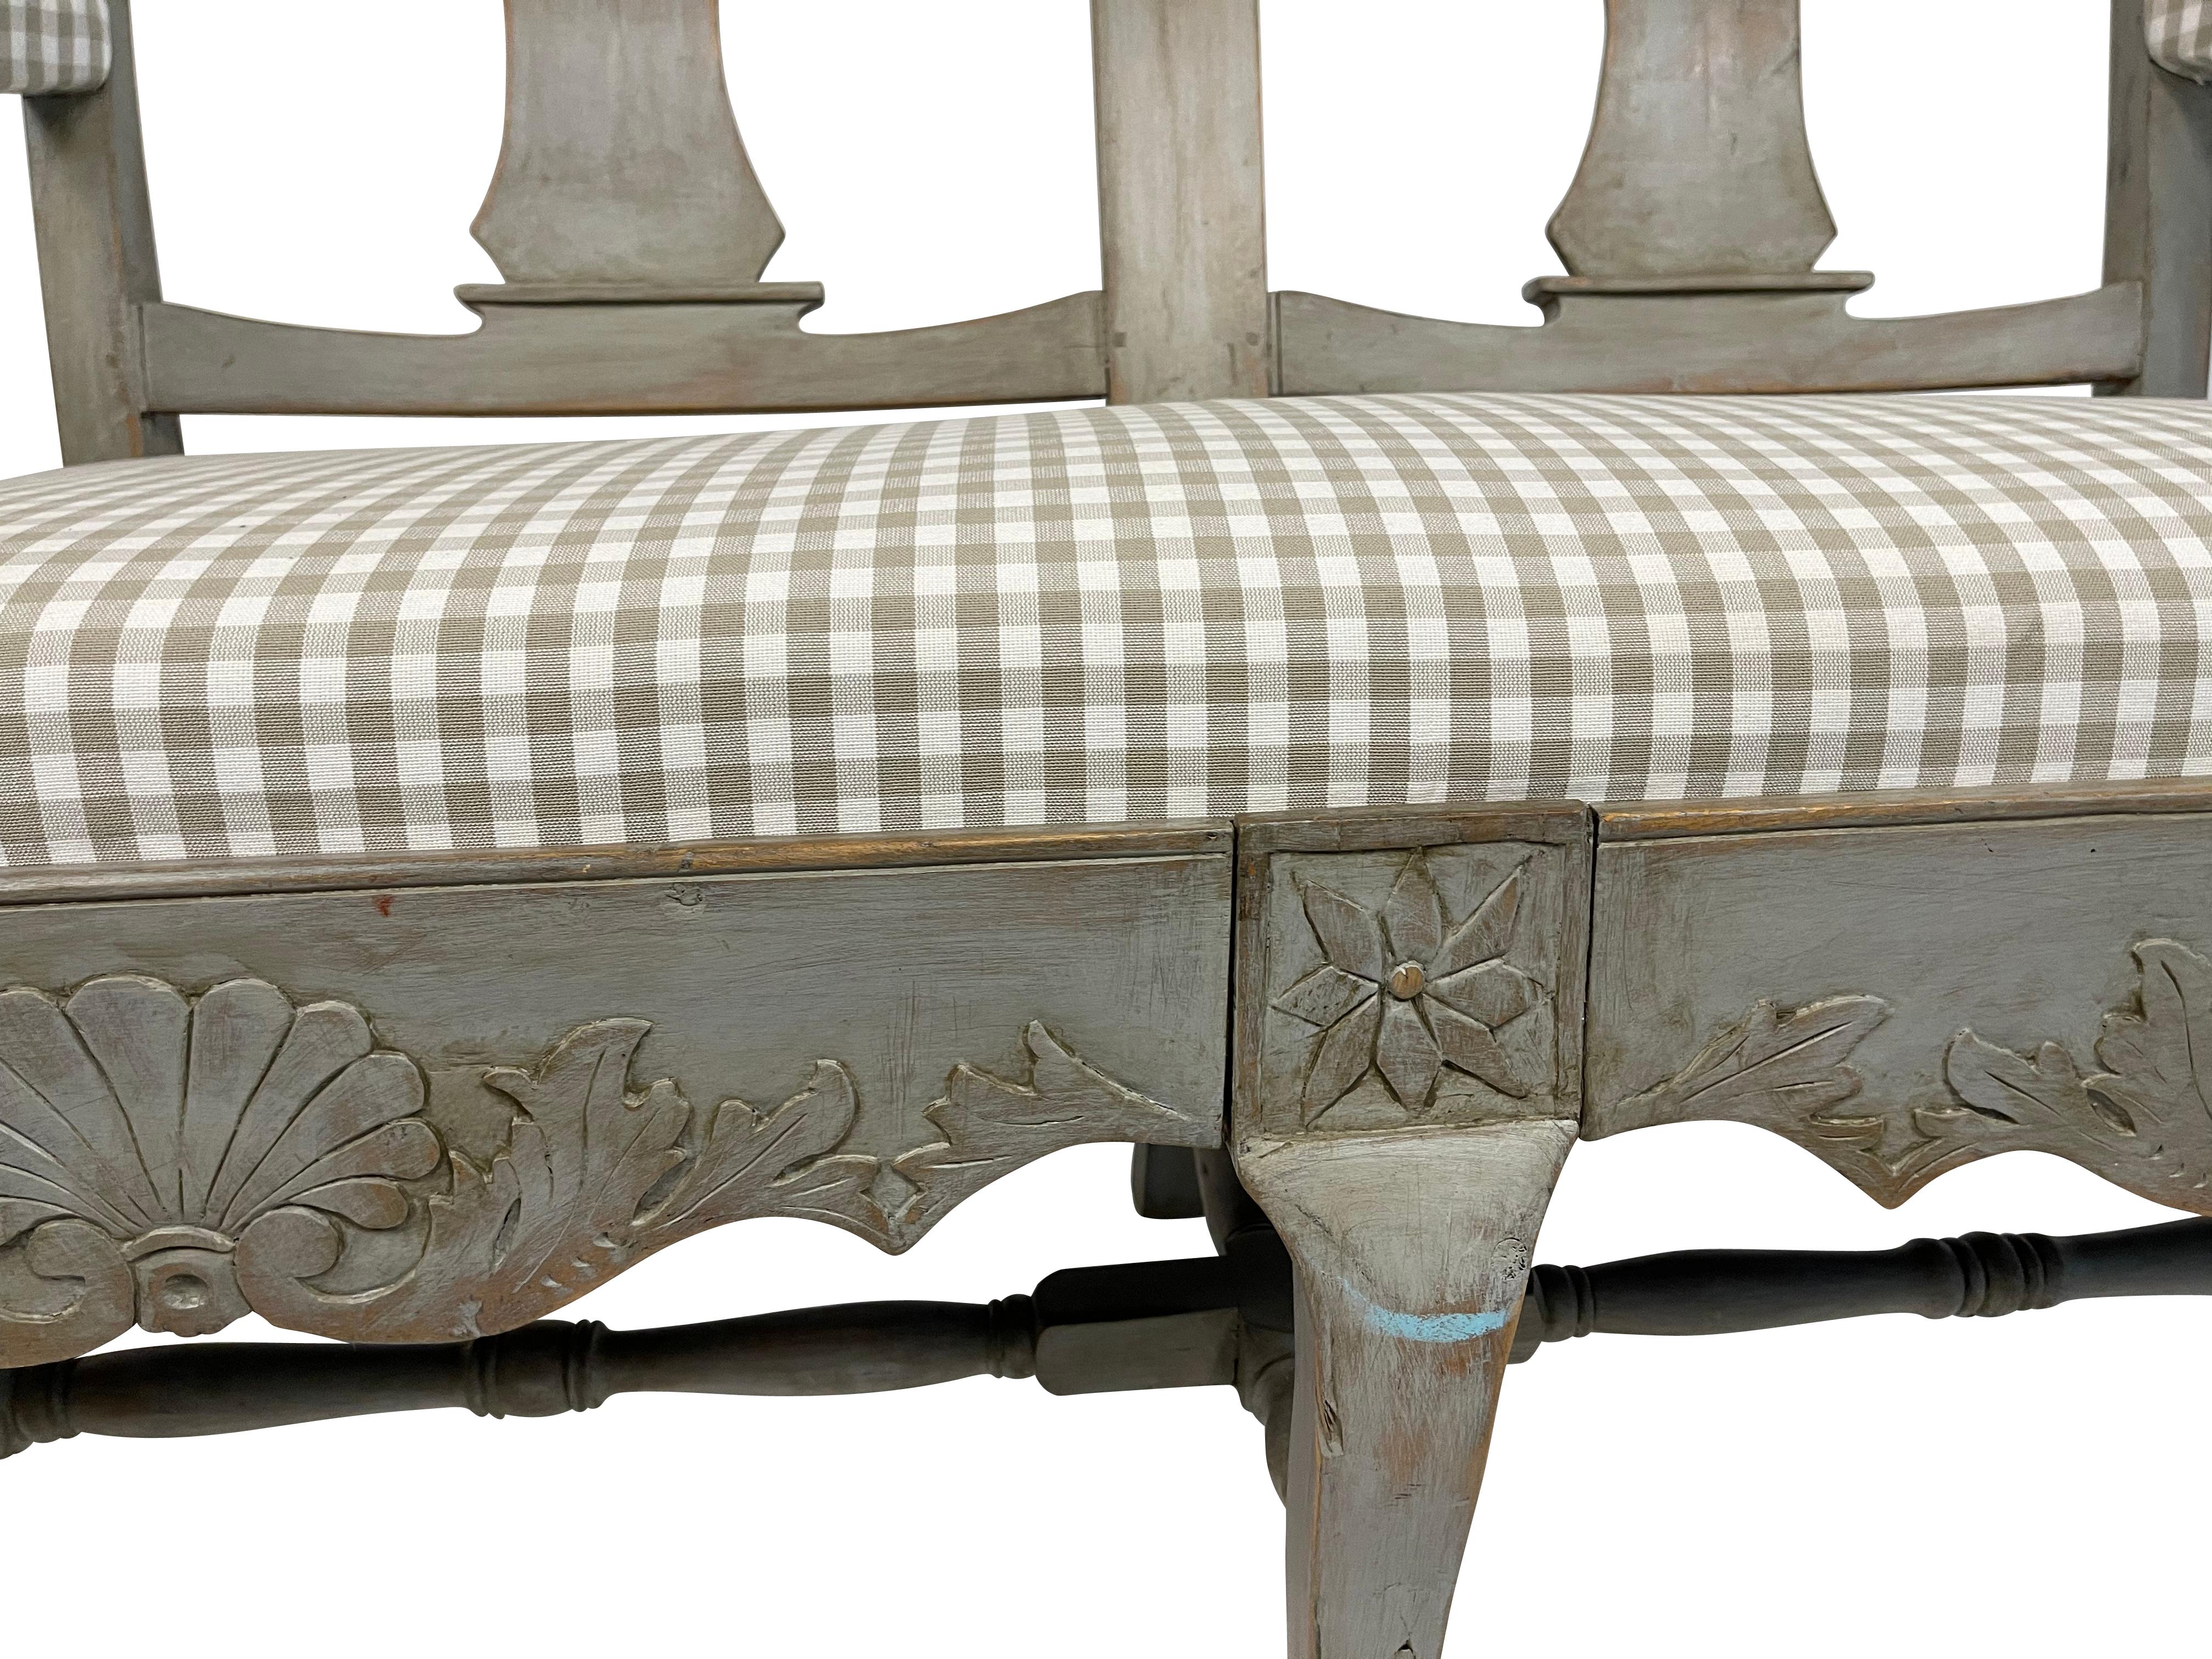 Swedish Gustavian rey painted settee with shell and foliate carving with turned stretcher bottom and gently curved legs. Newly upholstered in grey and white gingham seat cover. Measures: 44